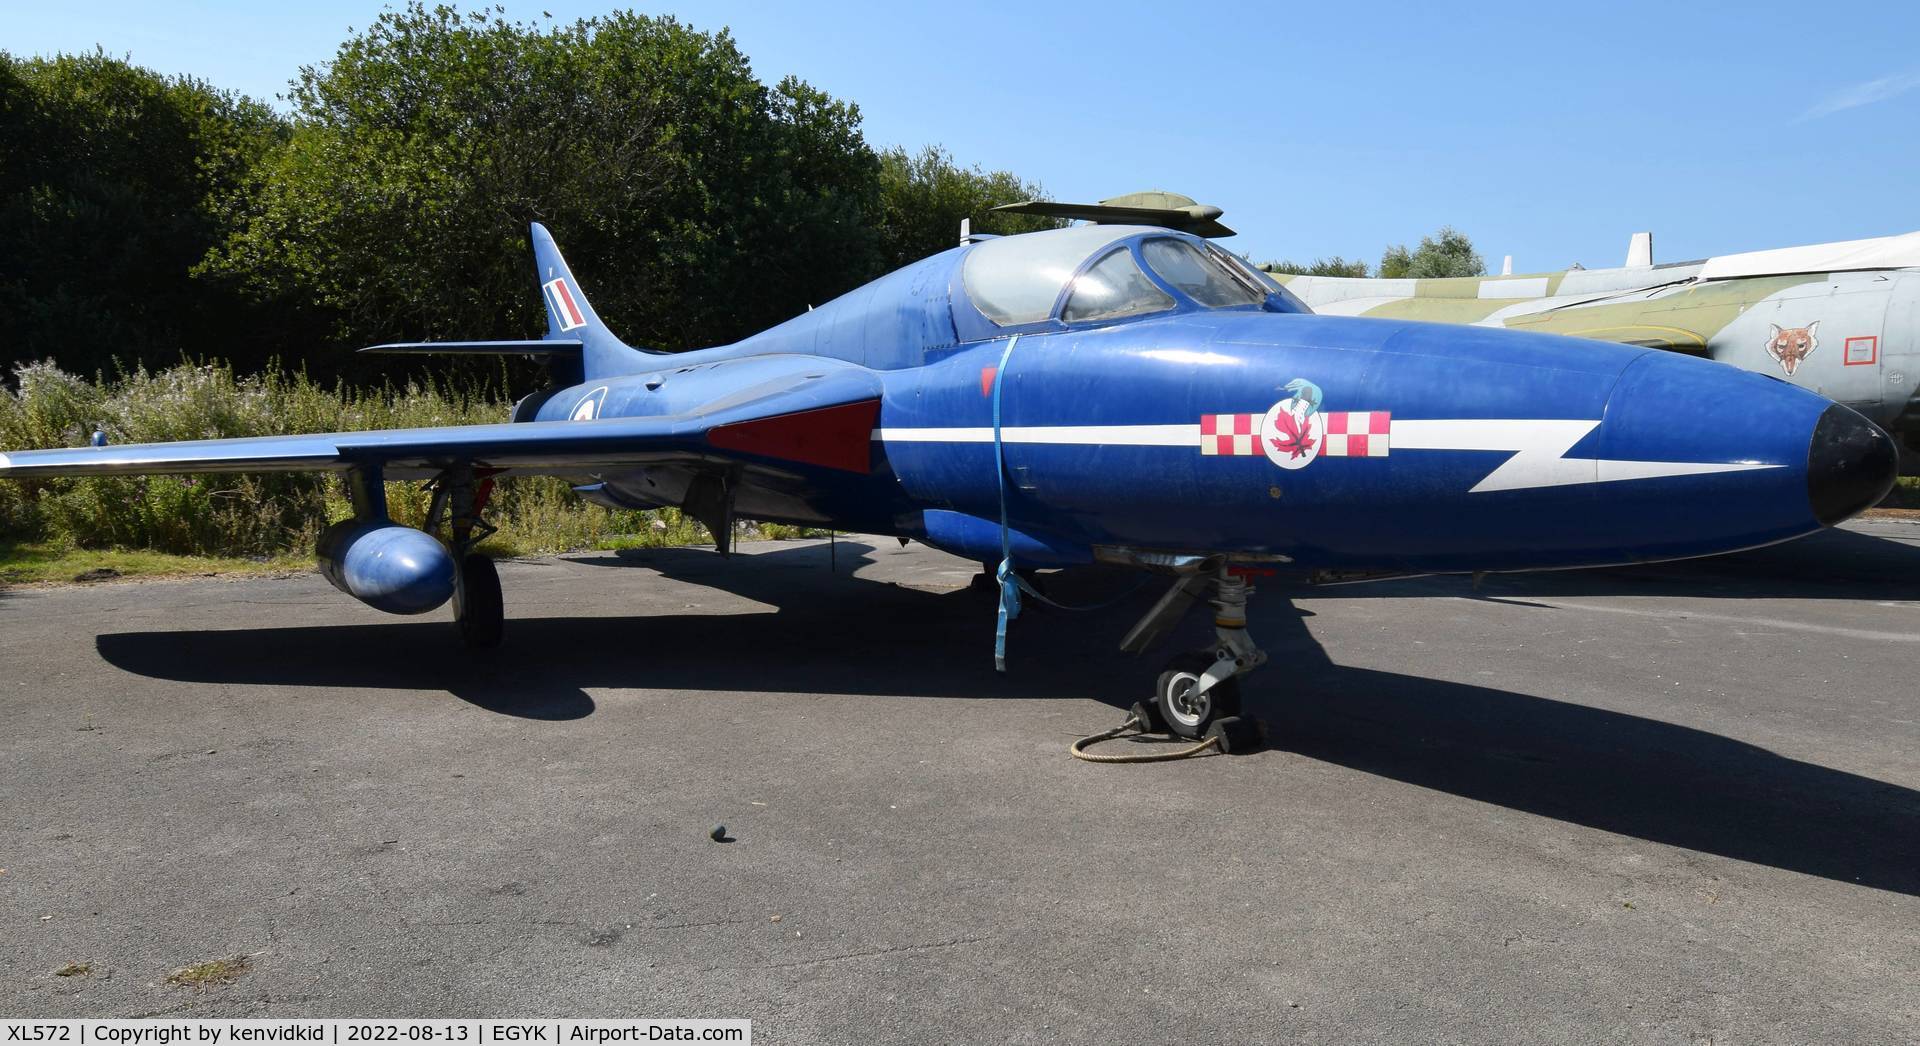 XL572, Hawker Hunter T.7 C/N HABL-003311, At the Yorkshire Air Museum. Painted as XL571.